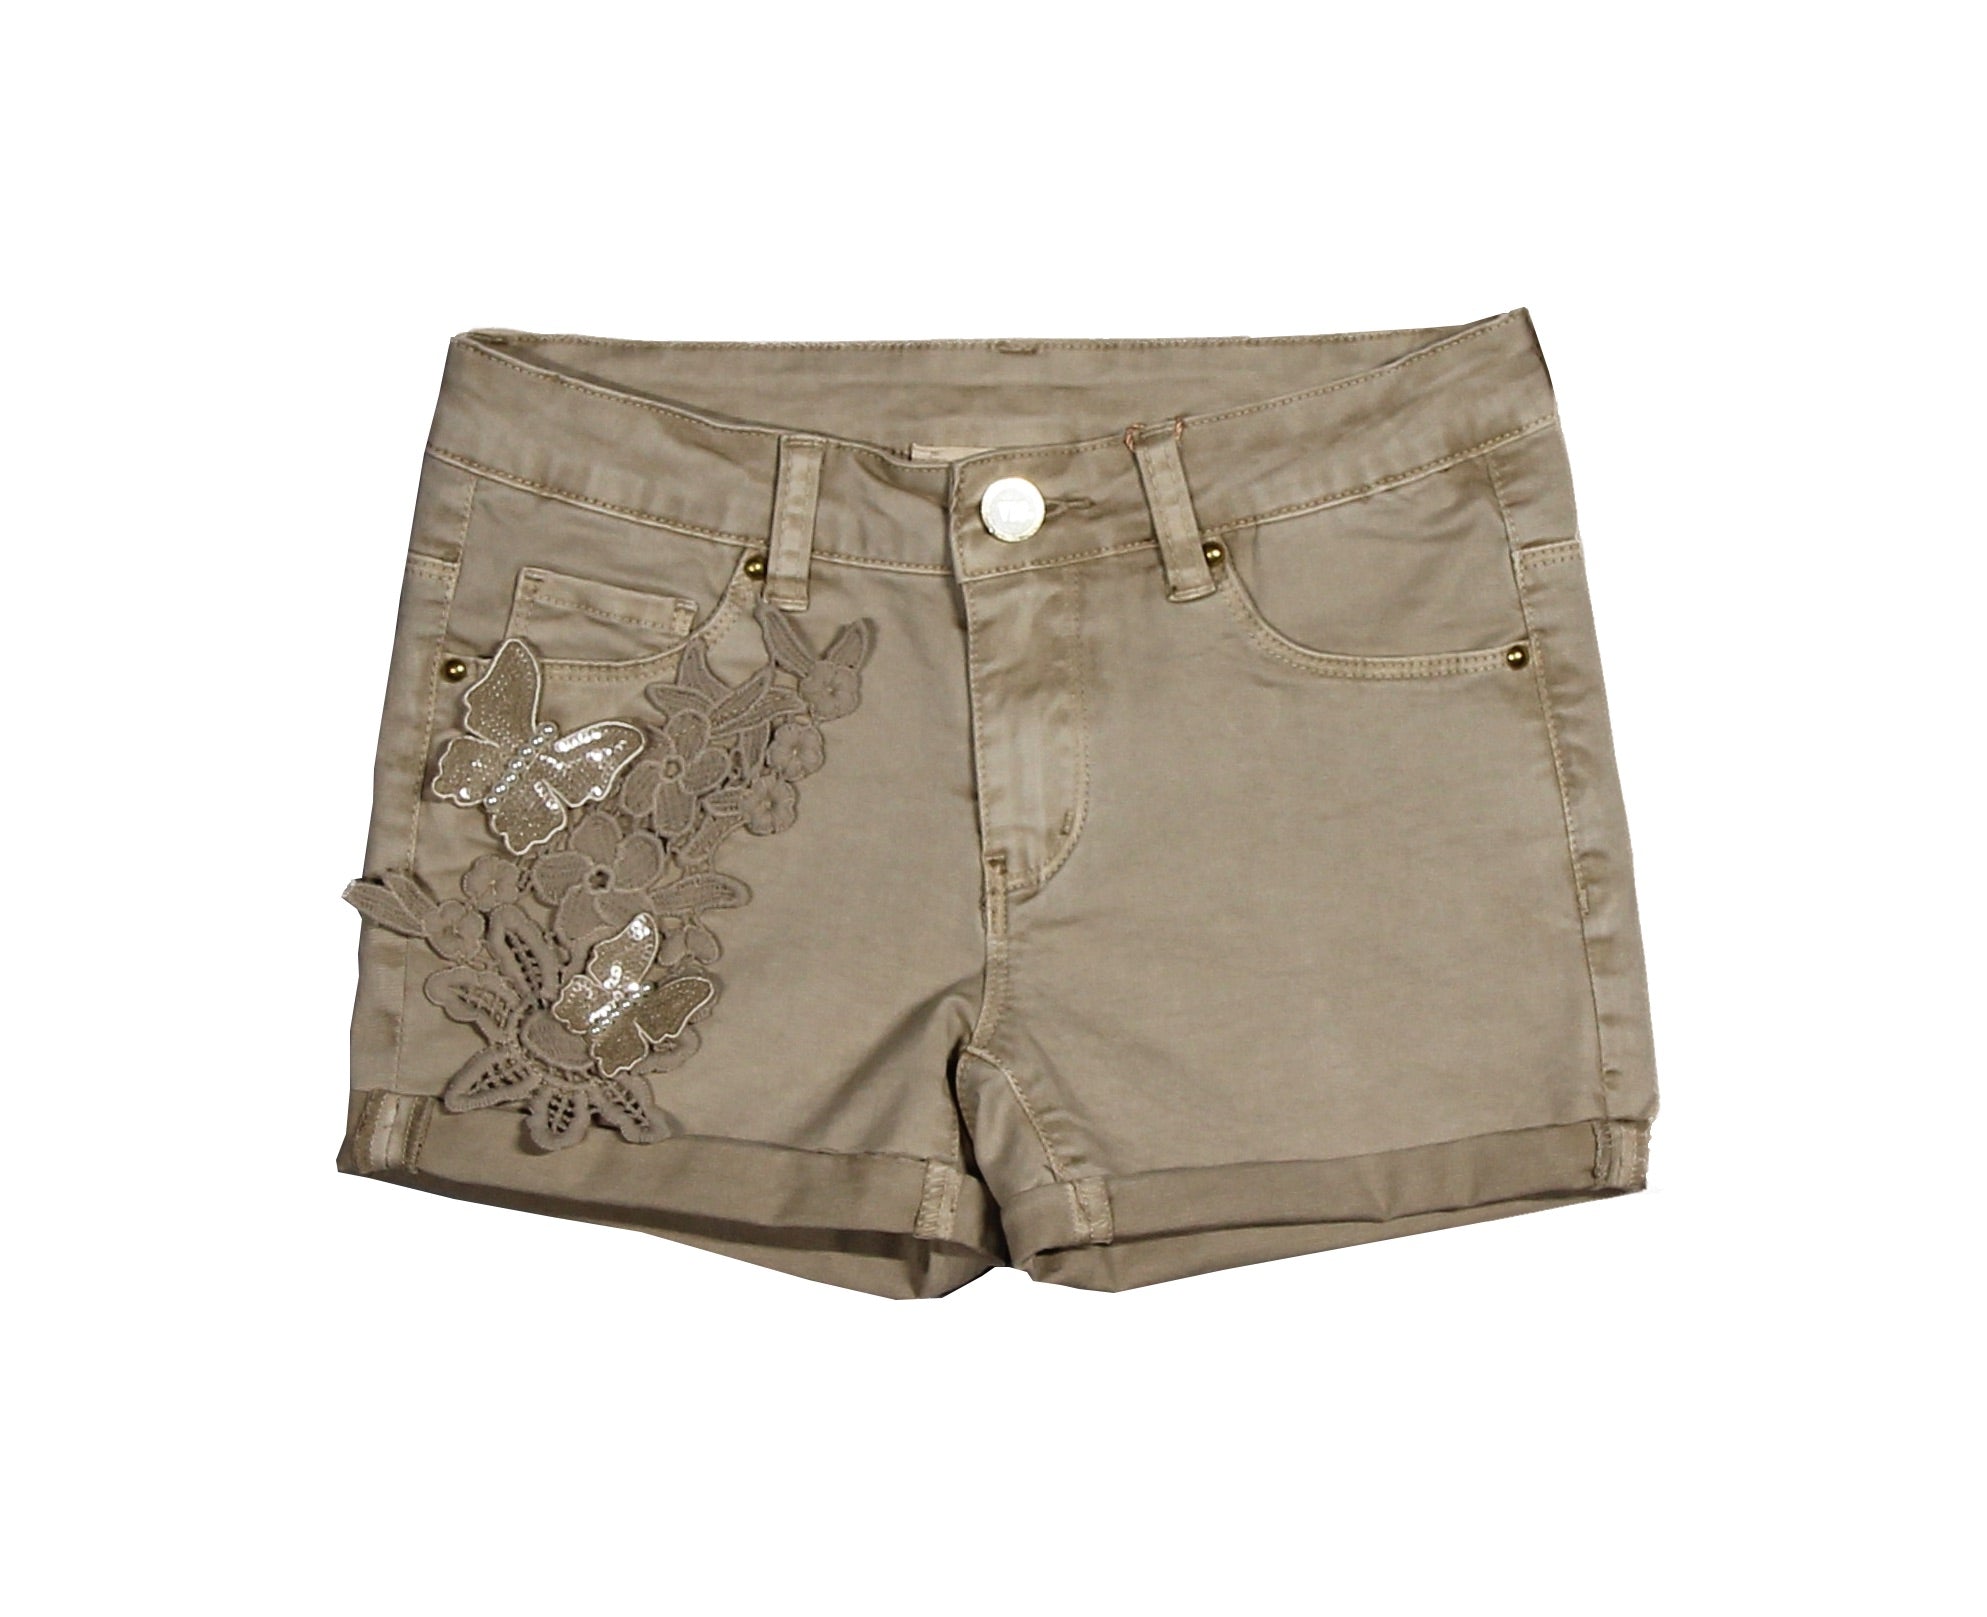 
  Shorts of the line Girl's Clothing Via Delle Perle model five regular pockets
  with flaps on ...